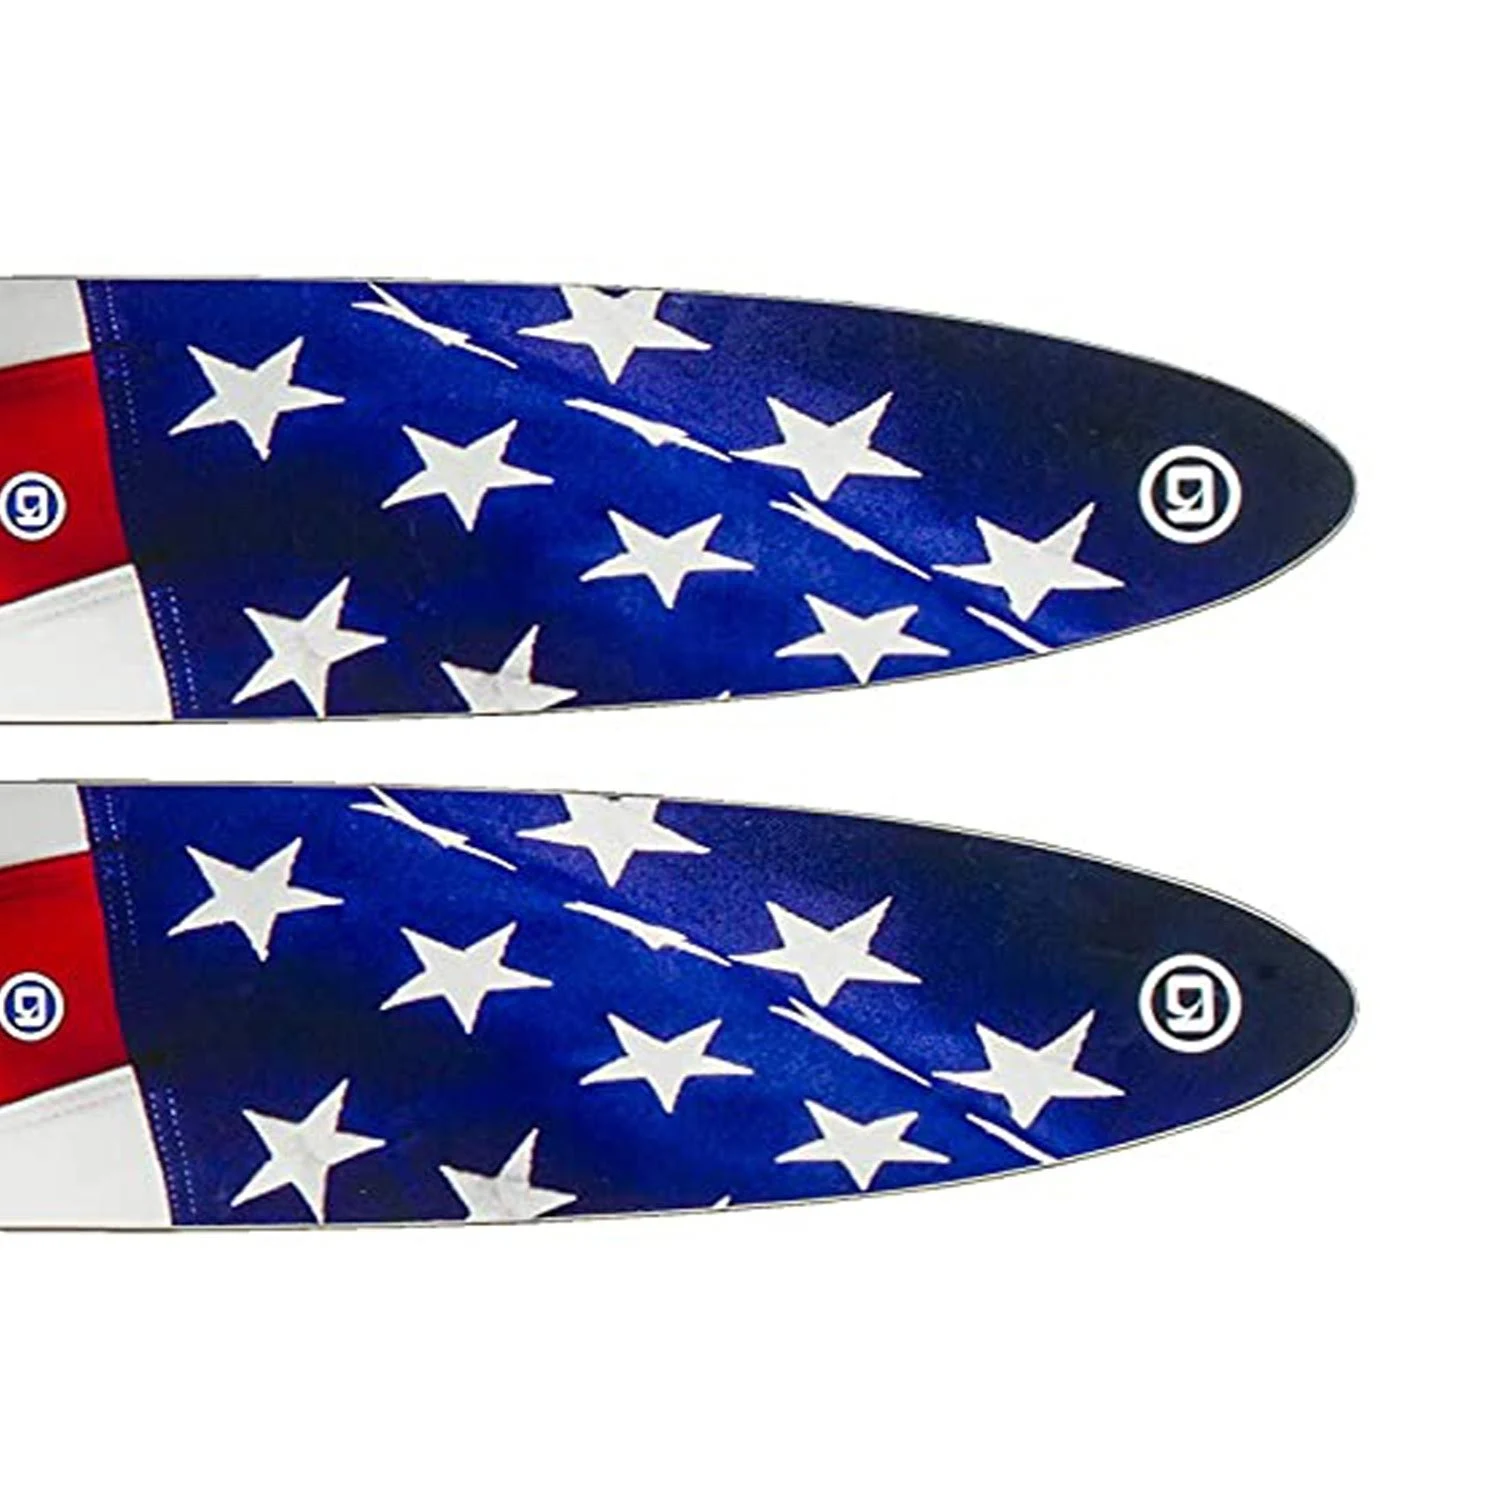 O’Brien Celebrity Combo Water Skis  C 68″ Flag